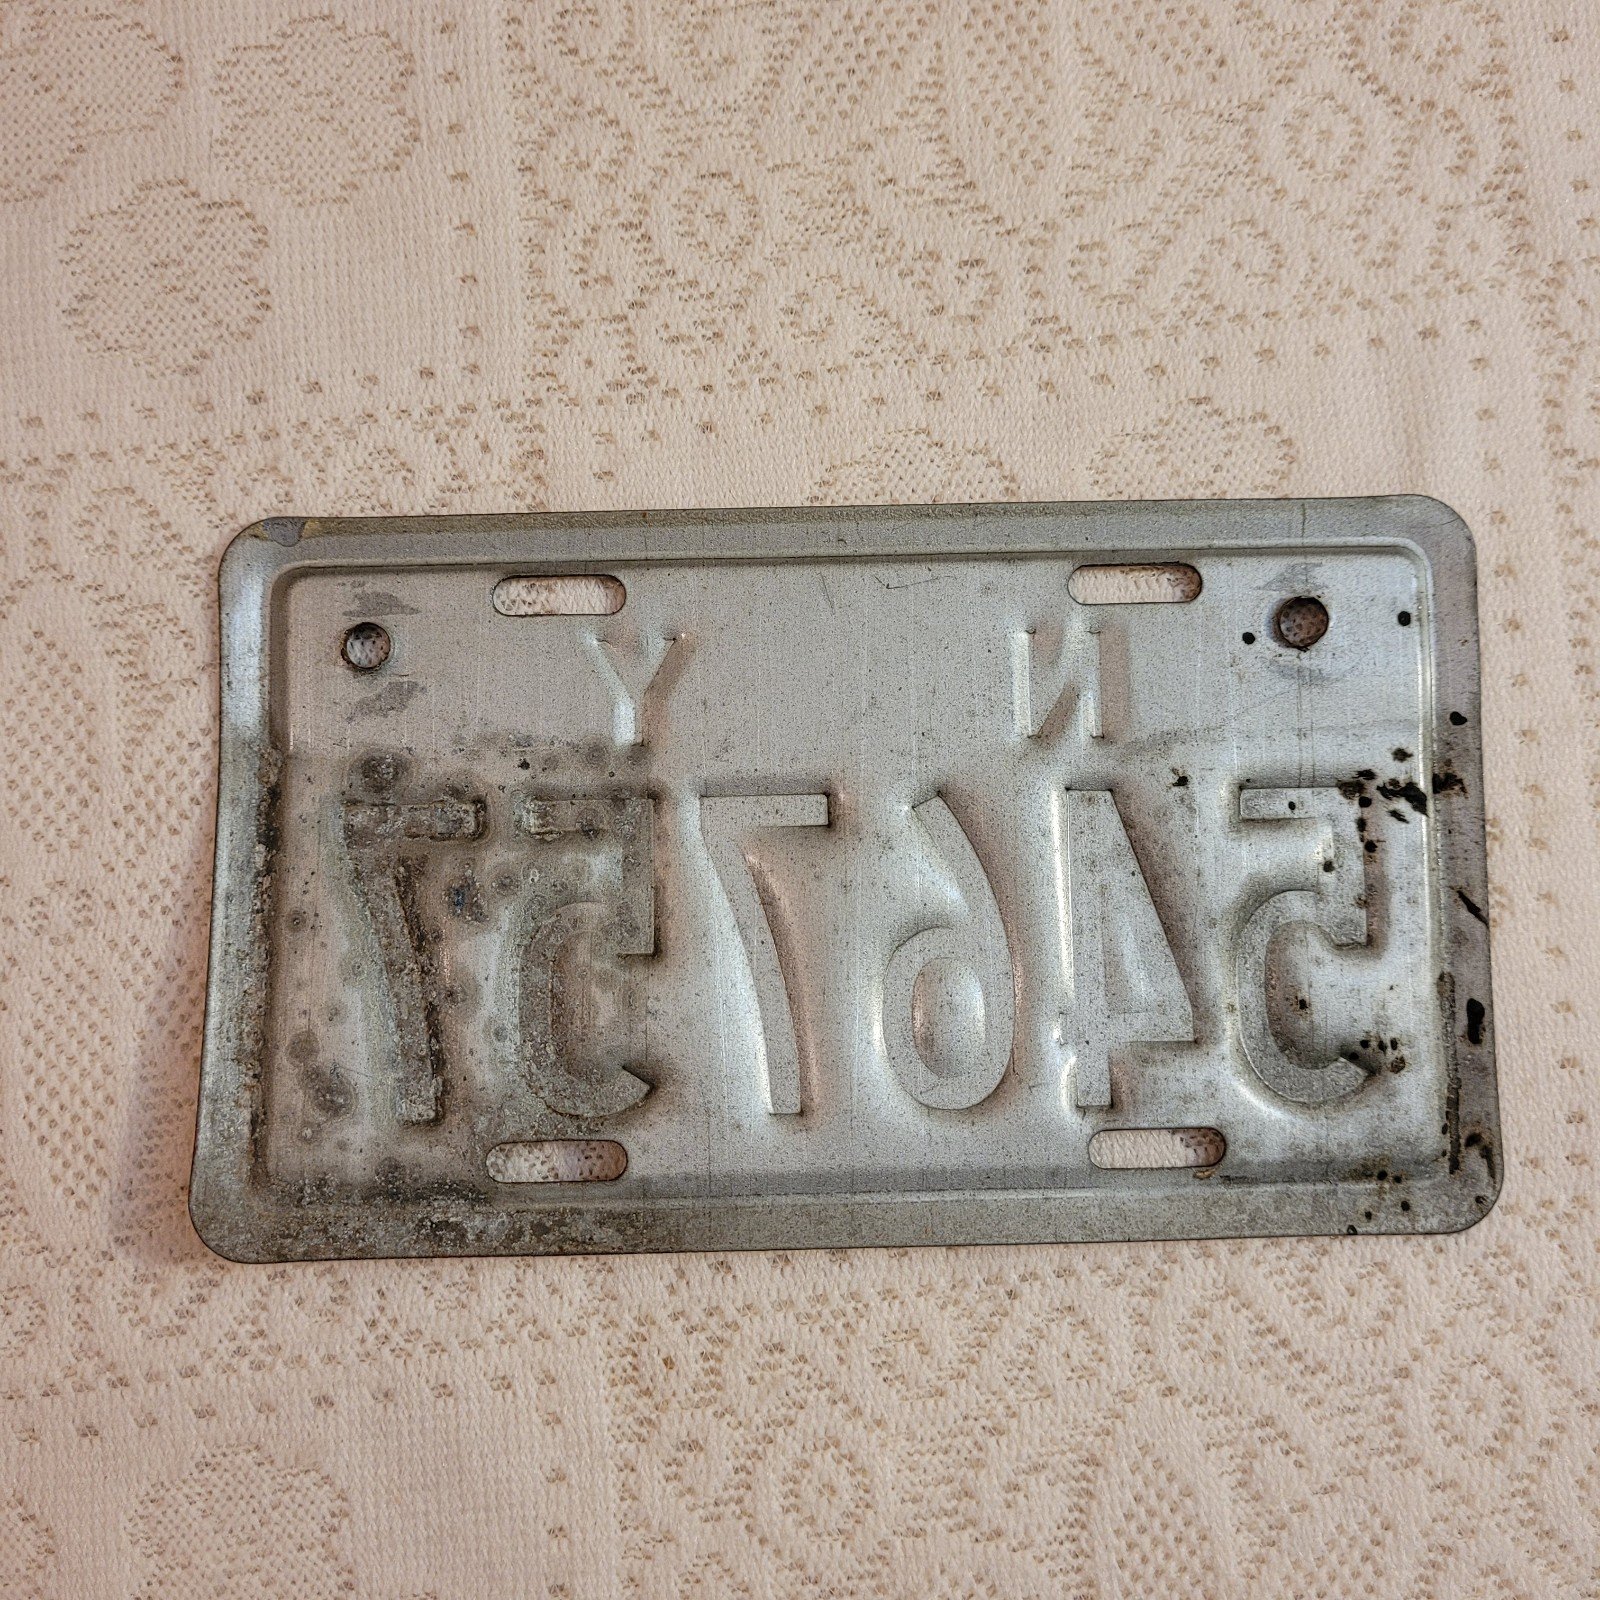 1987 NY Motorcycle License Plate AieHQsaSf